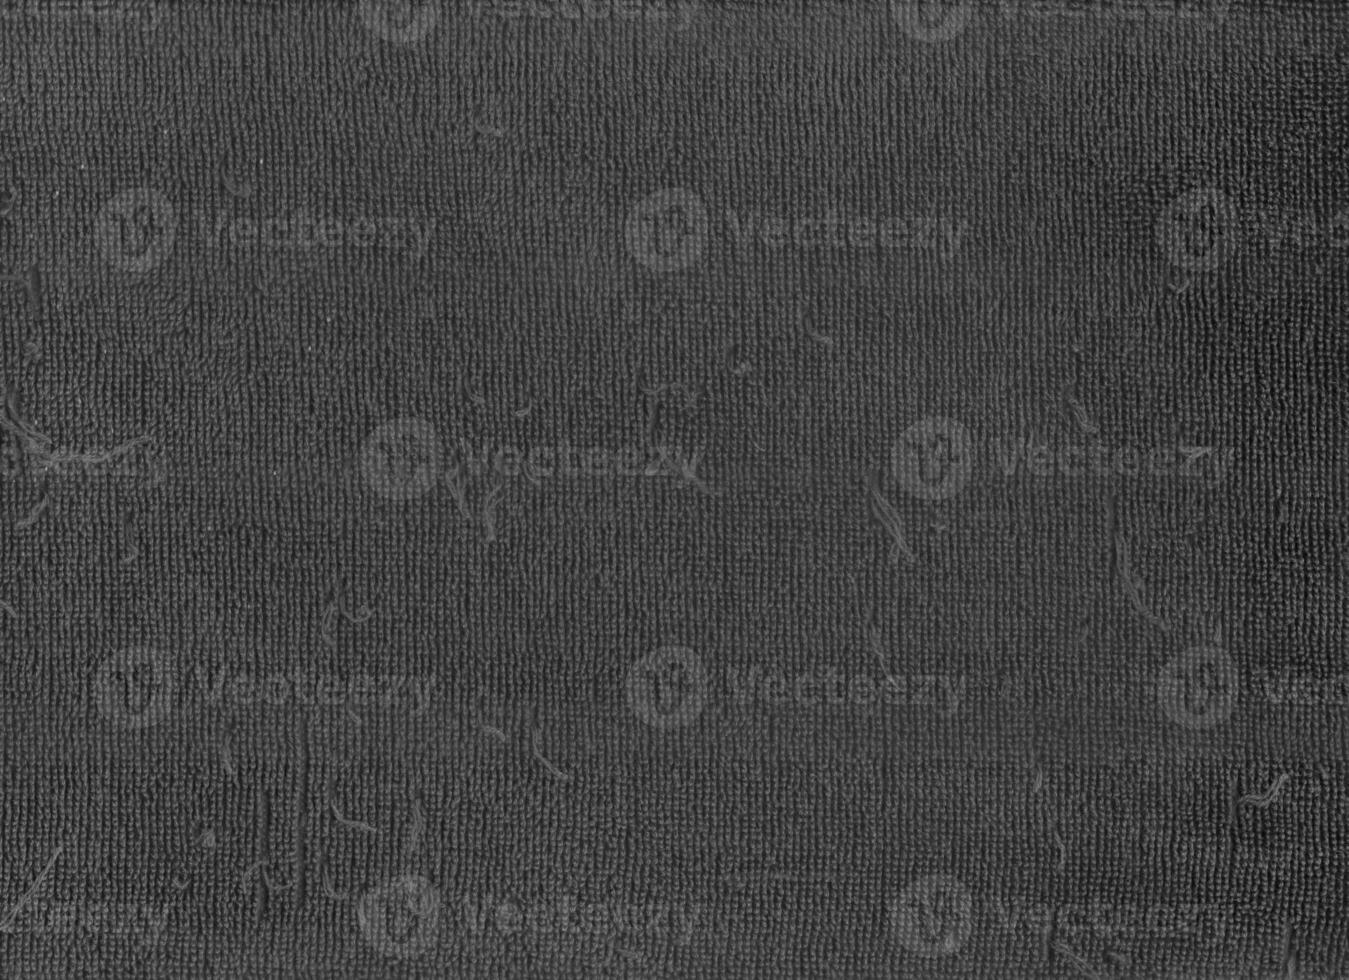 Black and white natural cotton towel background grunge texture for overlay photo